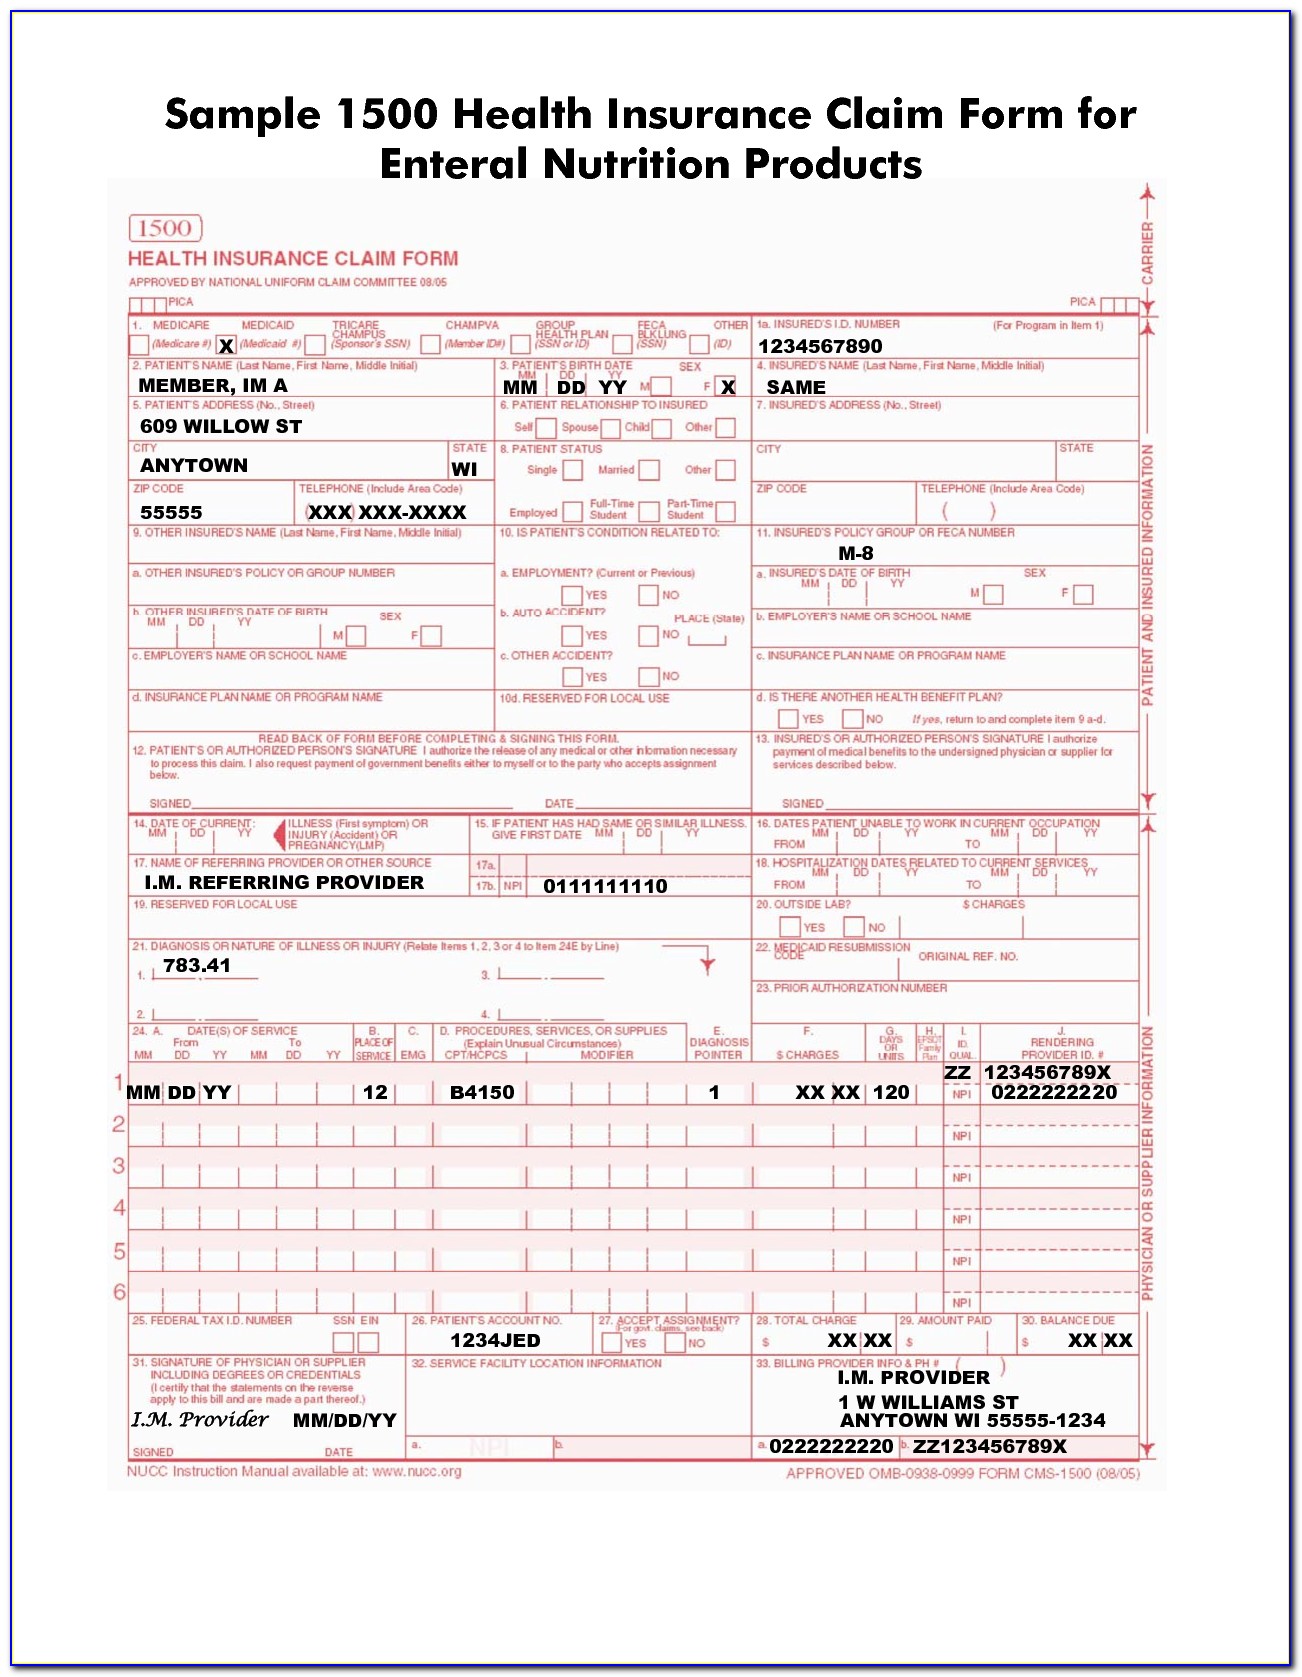 completed-cms-1500-claim-form-sample-form-resume-examples-k75pbgvkl2